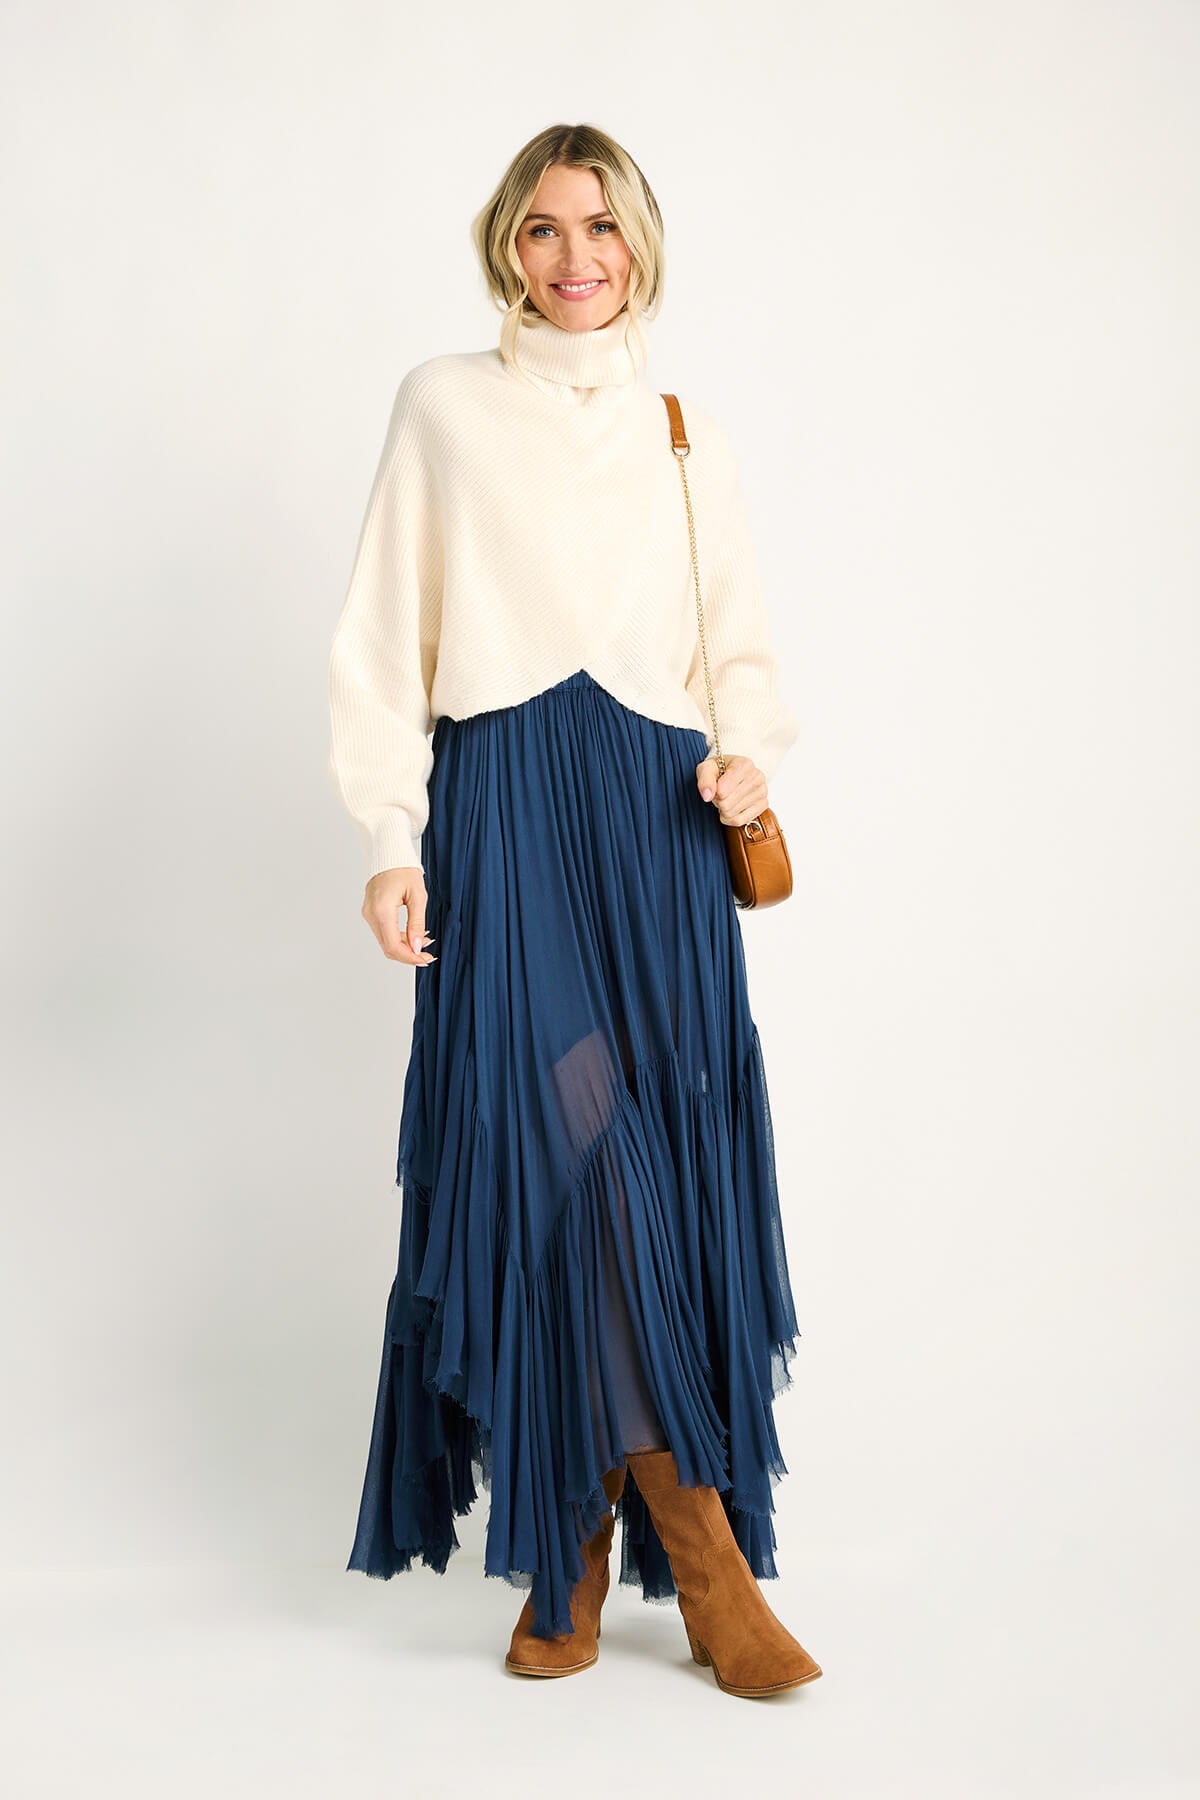 Free People Clover Skirt